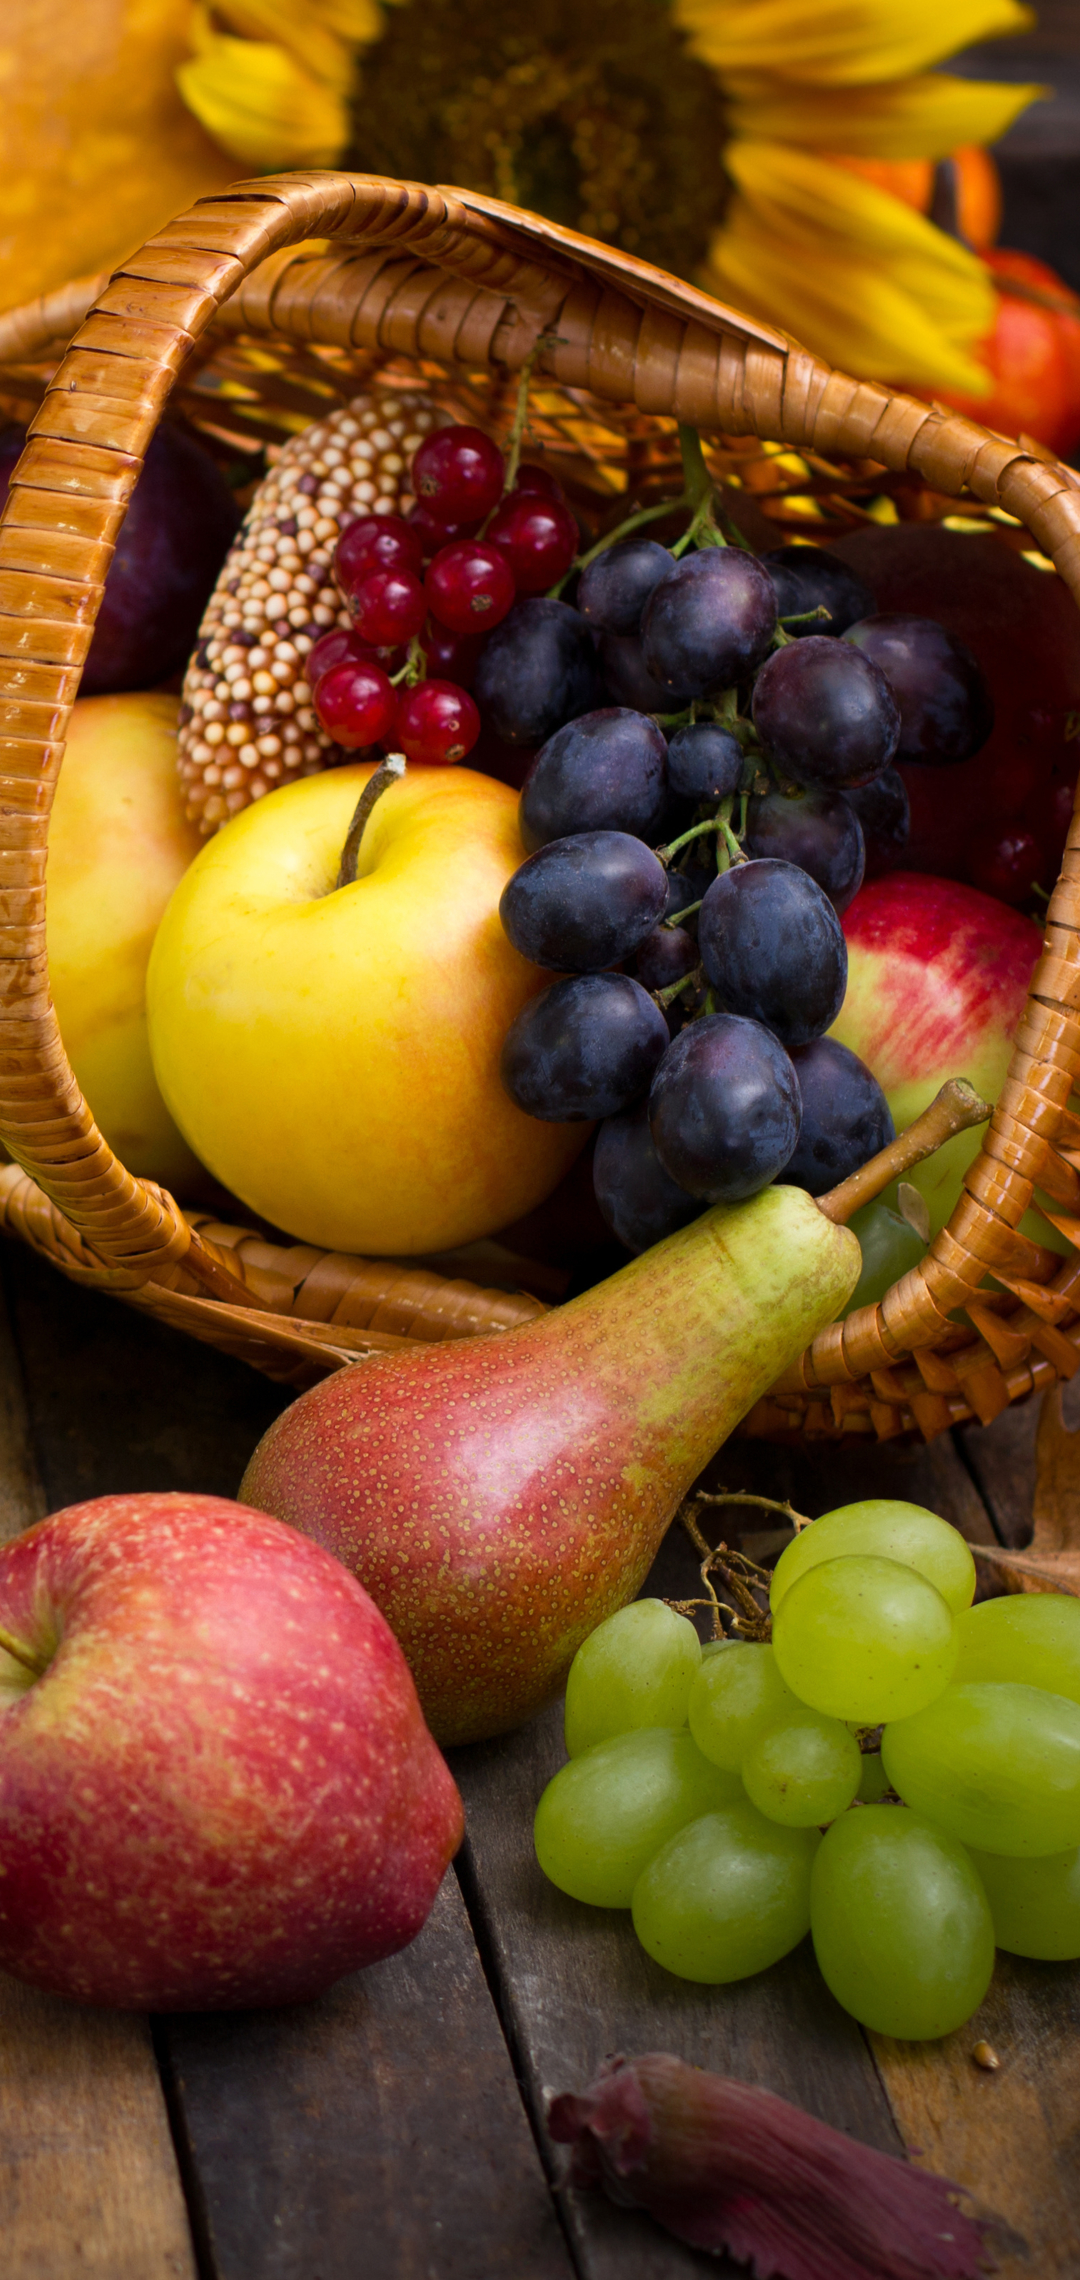 harvest, food, still life, pear, fall, apple, grapes phone background